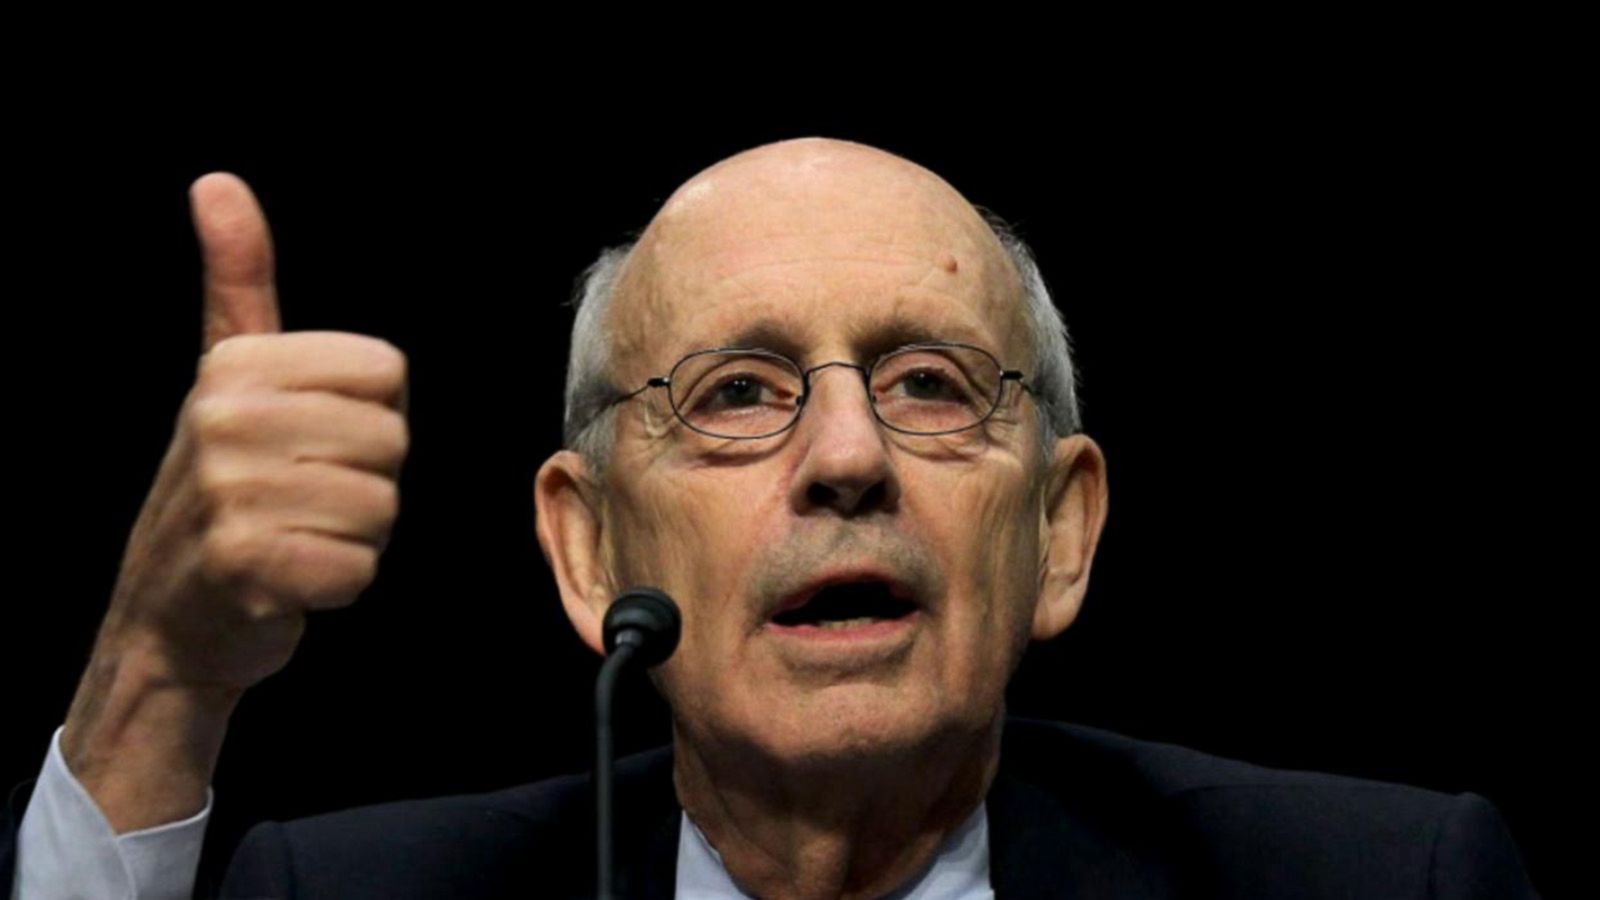 Justice Stephen Breyer to retire from Supreme Court - Good Morning America